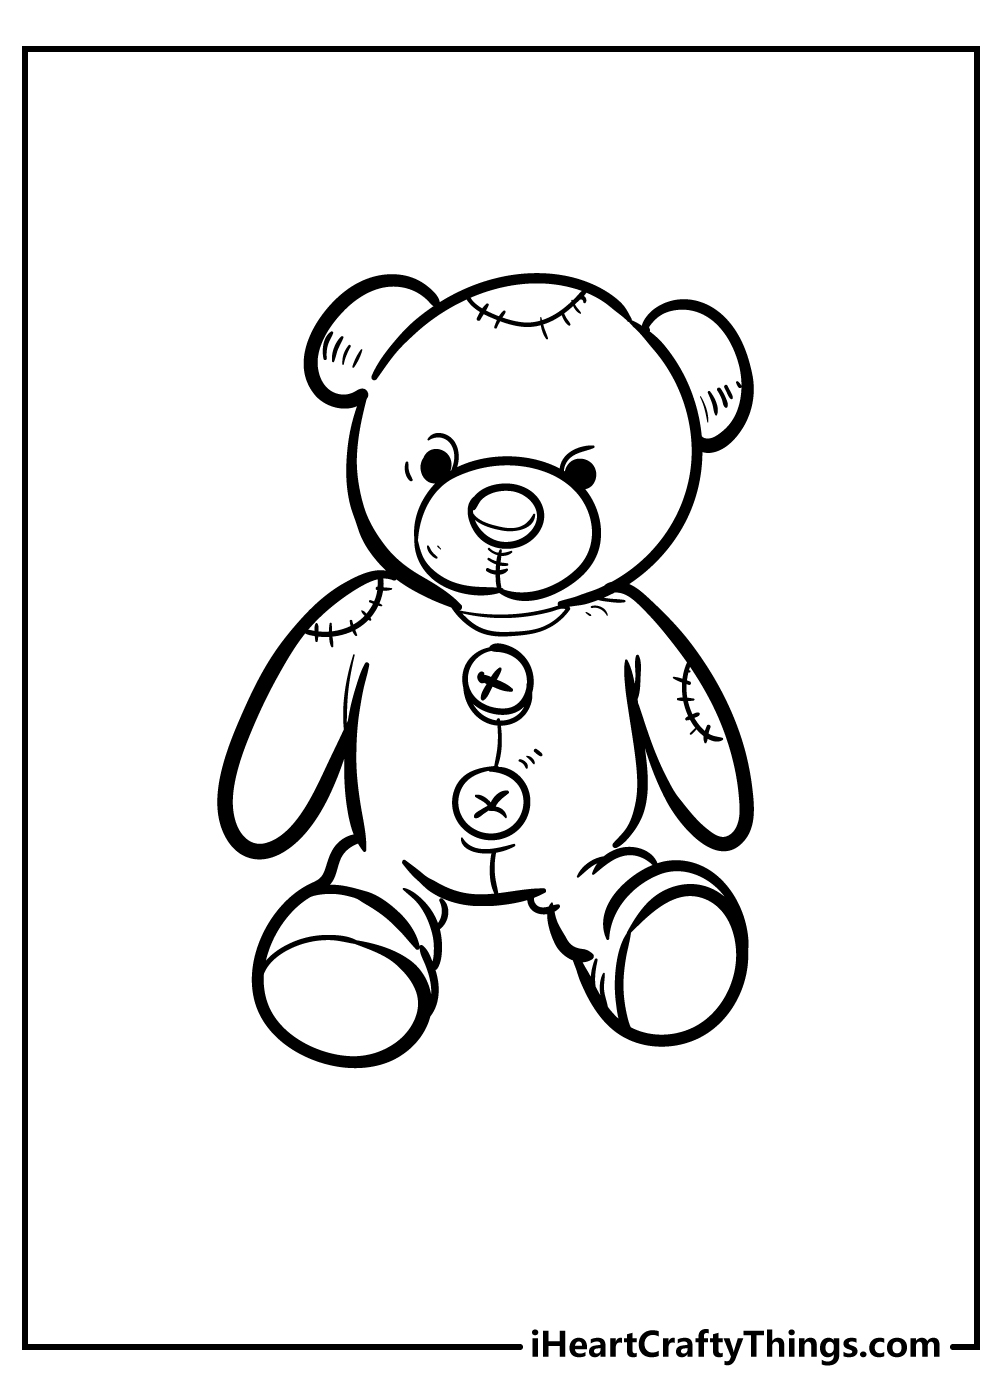 Teddy Bear Coloring Pages for adults free printable